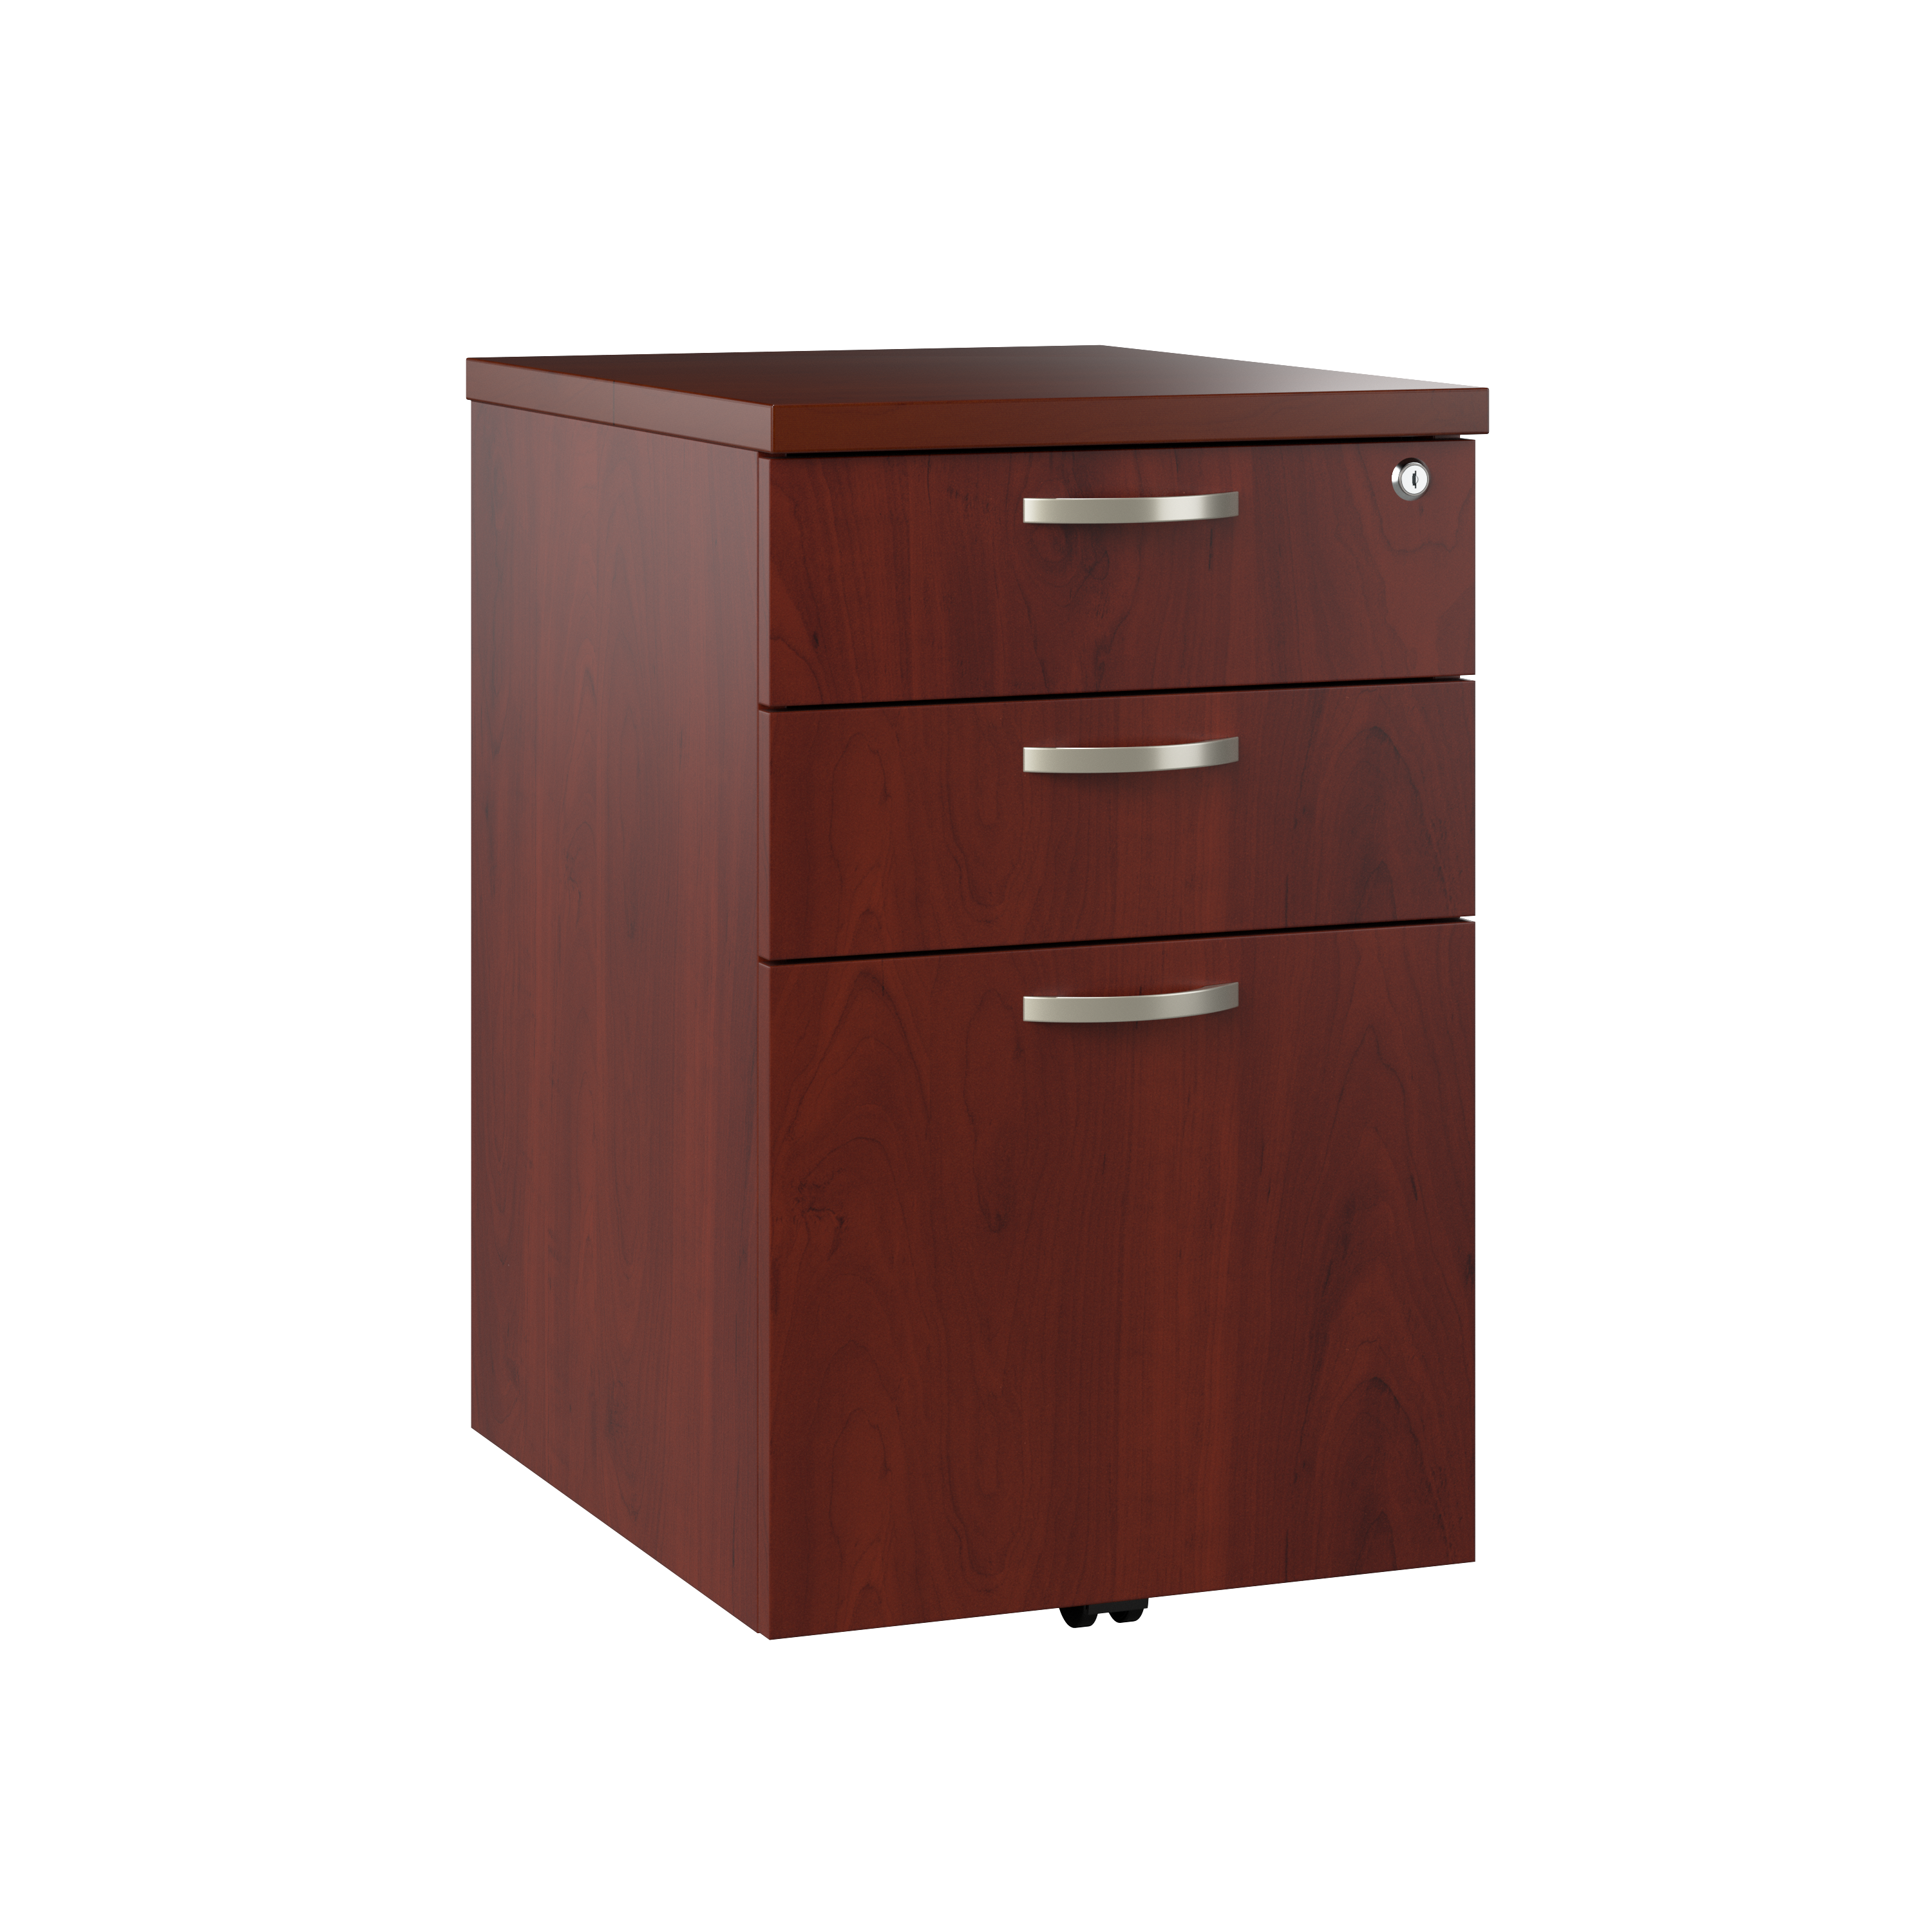 Shop Bush Business Furniture Office in an Hour 3 Drawer Mobile File Cabinet 02 WC36453-03 #color_hansen cherry